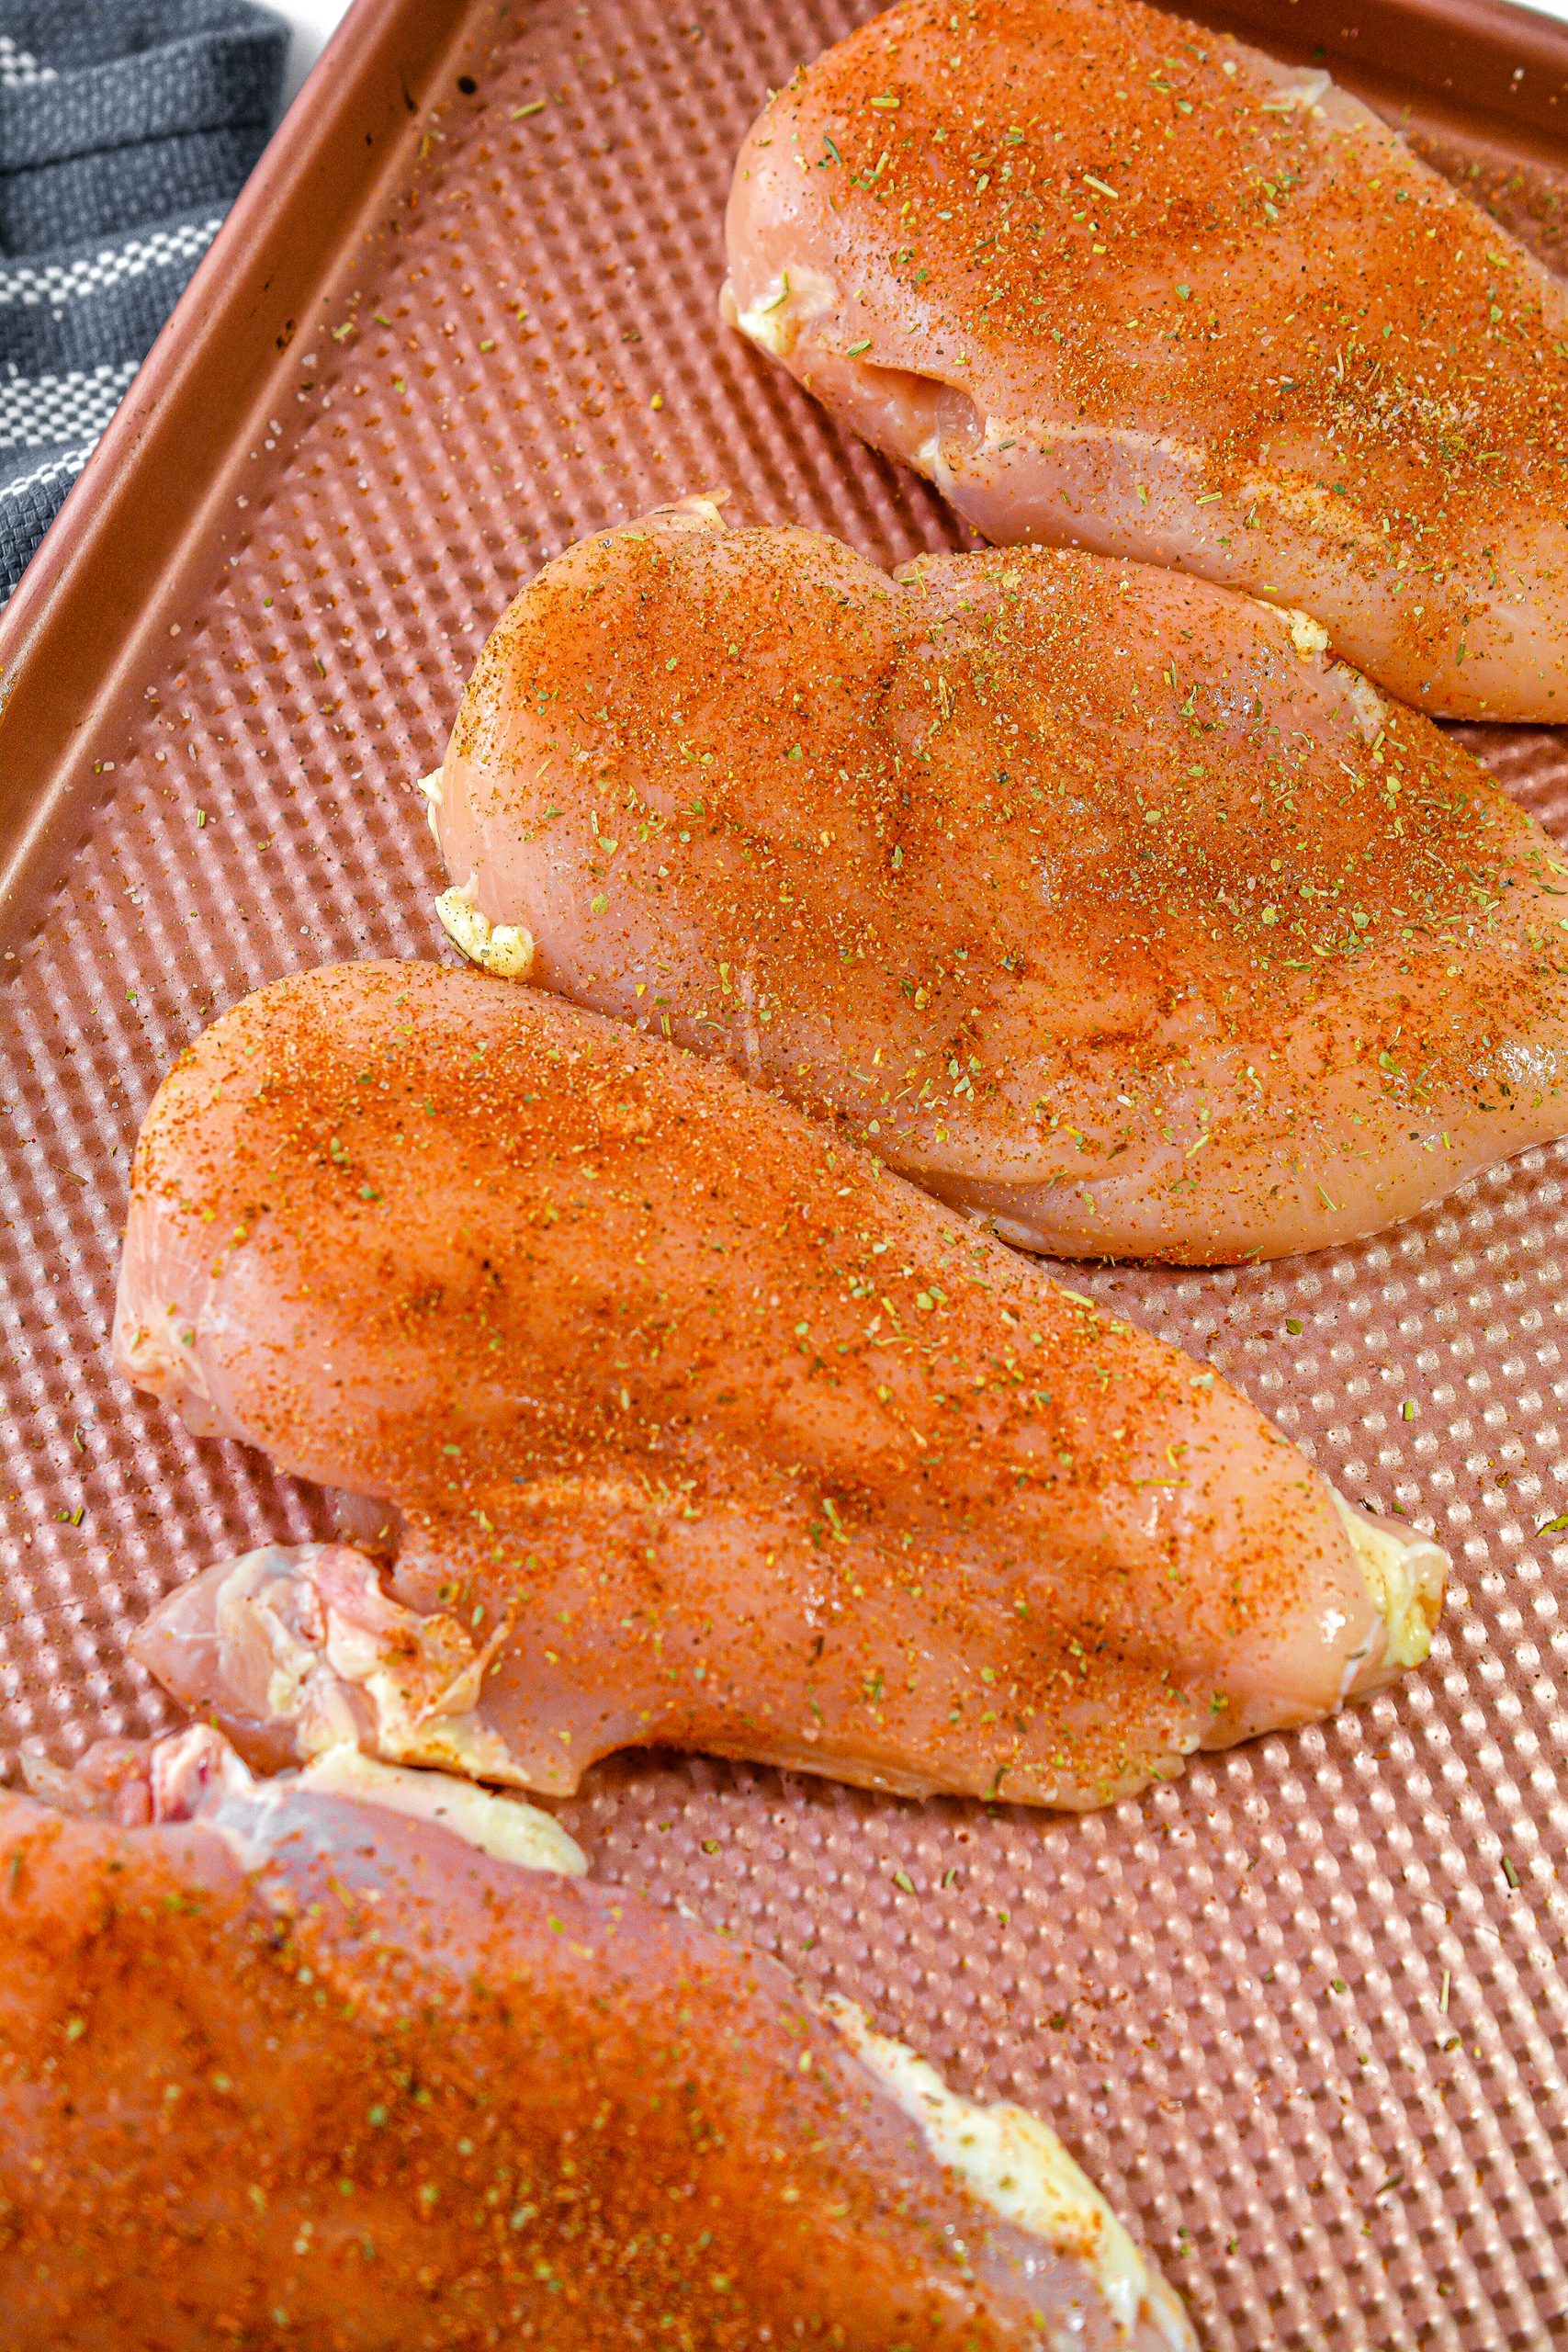 Season both sides of the chicken breasts with the spice mixture.